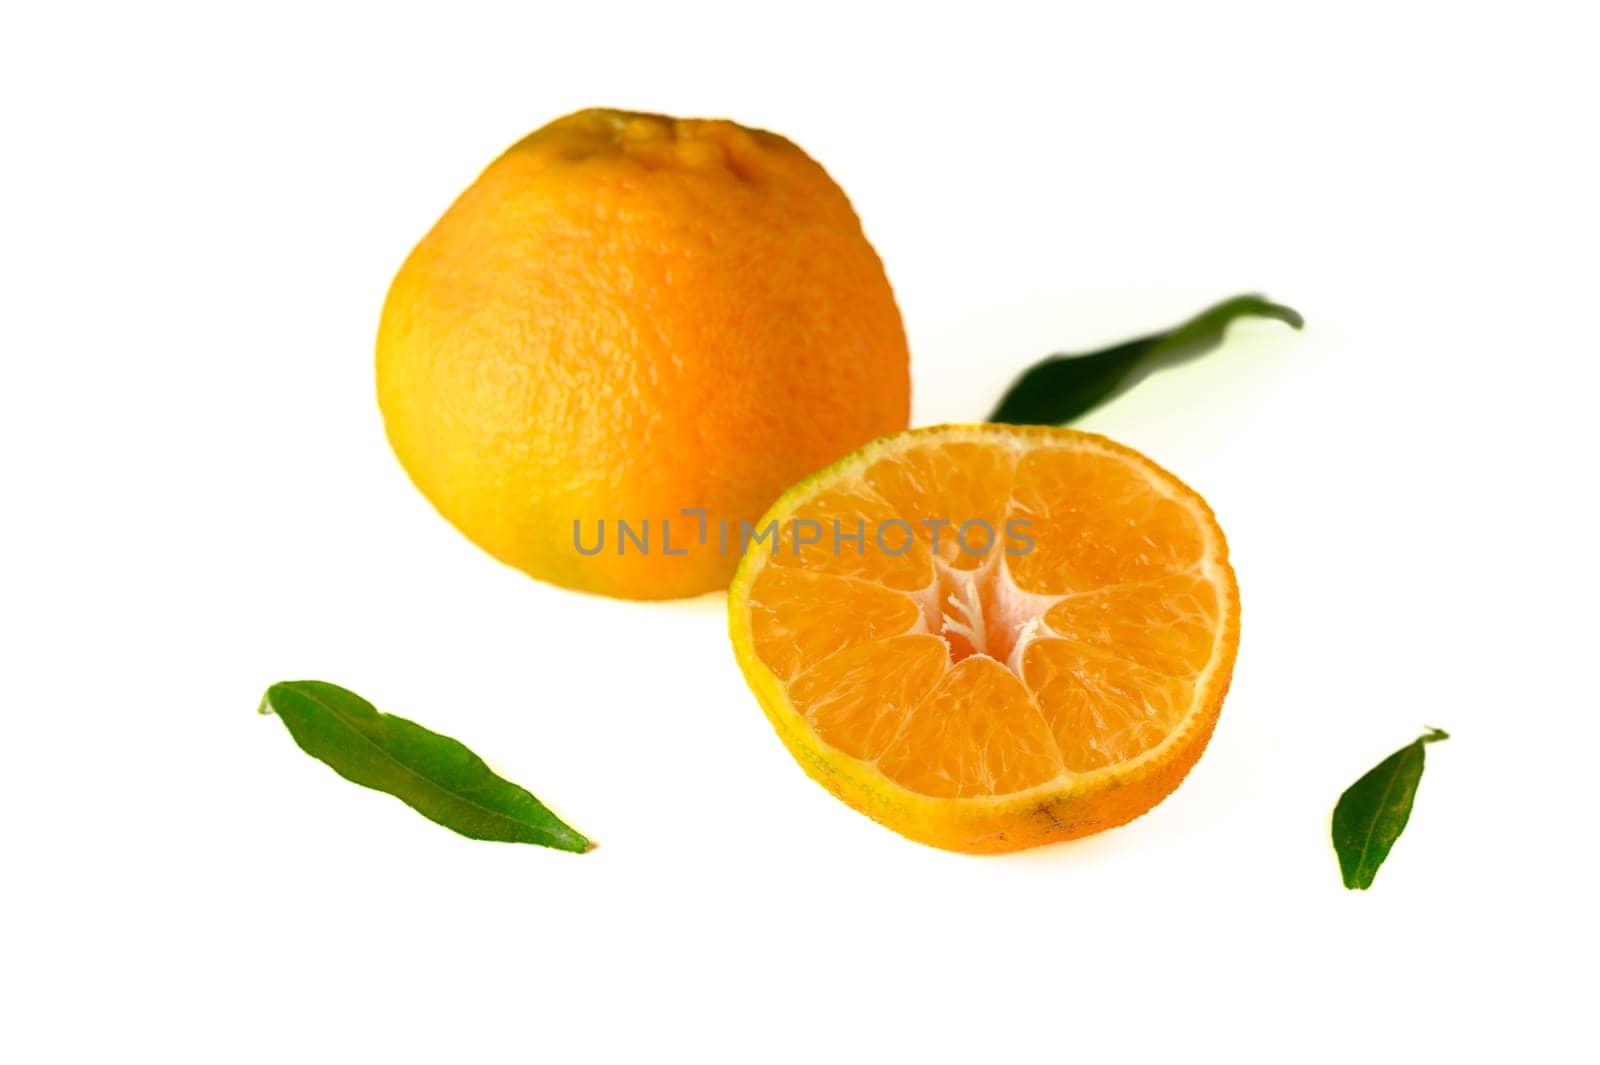 fresh appetizing half tangerine and whole tangerine on a white background 2 by Mixa74